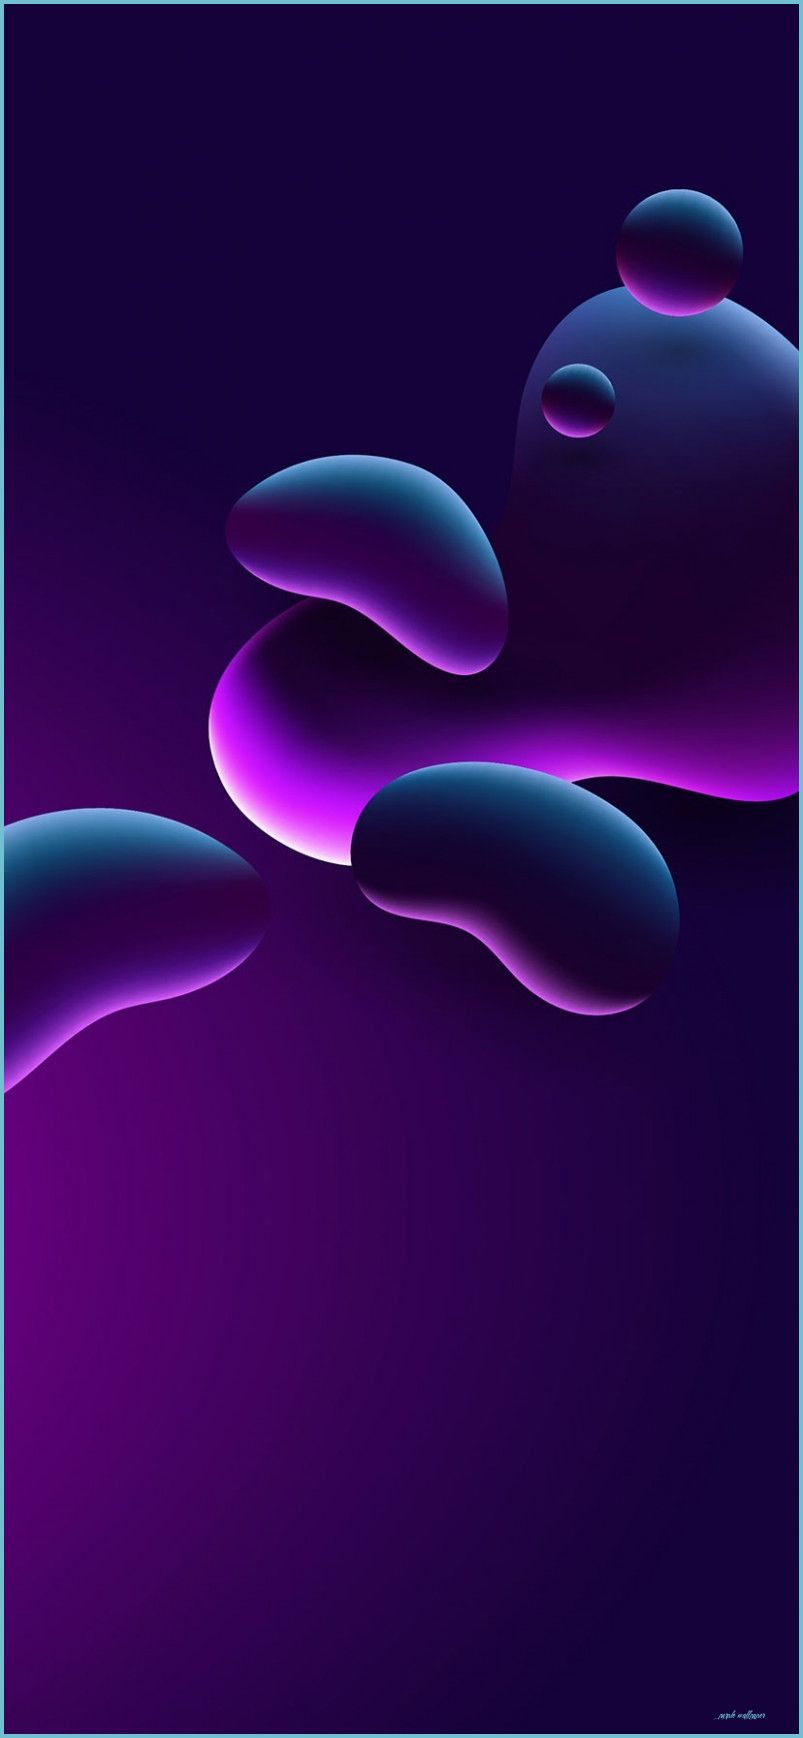 Download the new purple iPhone 12 wallpaper for your devices right